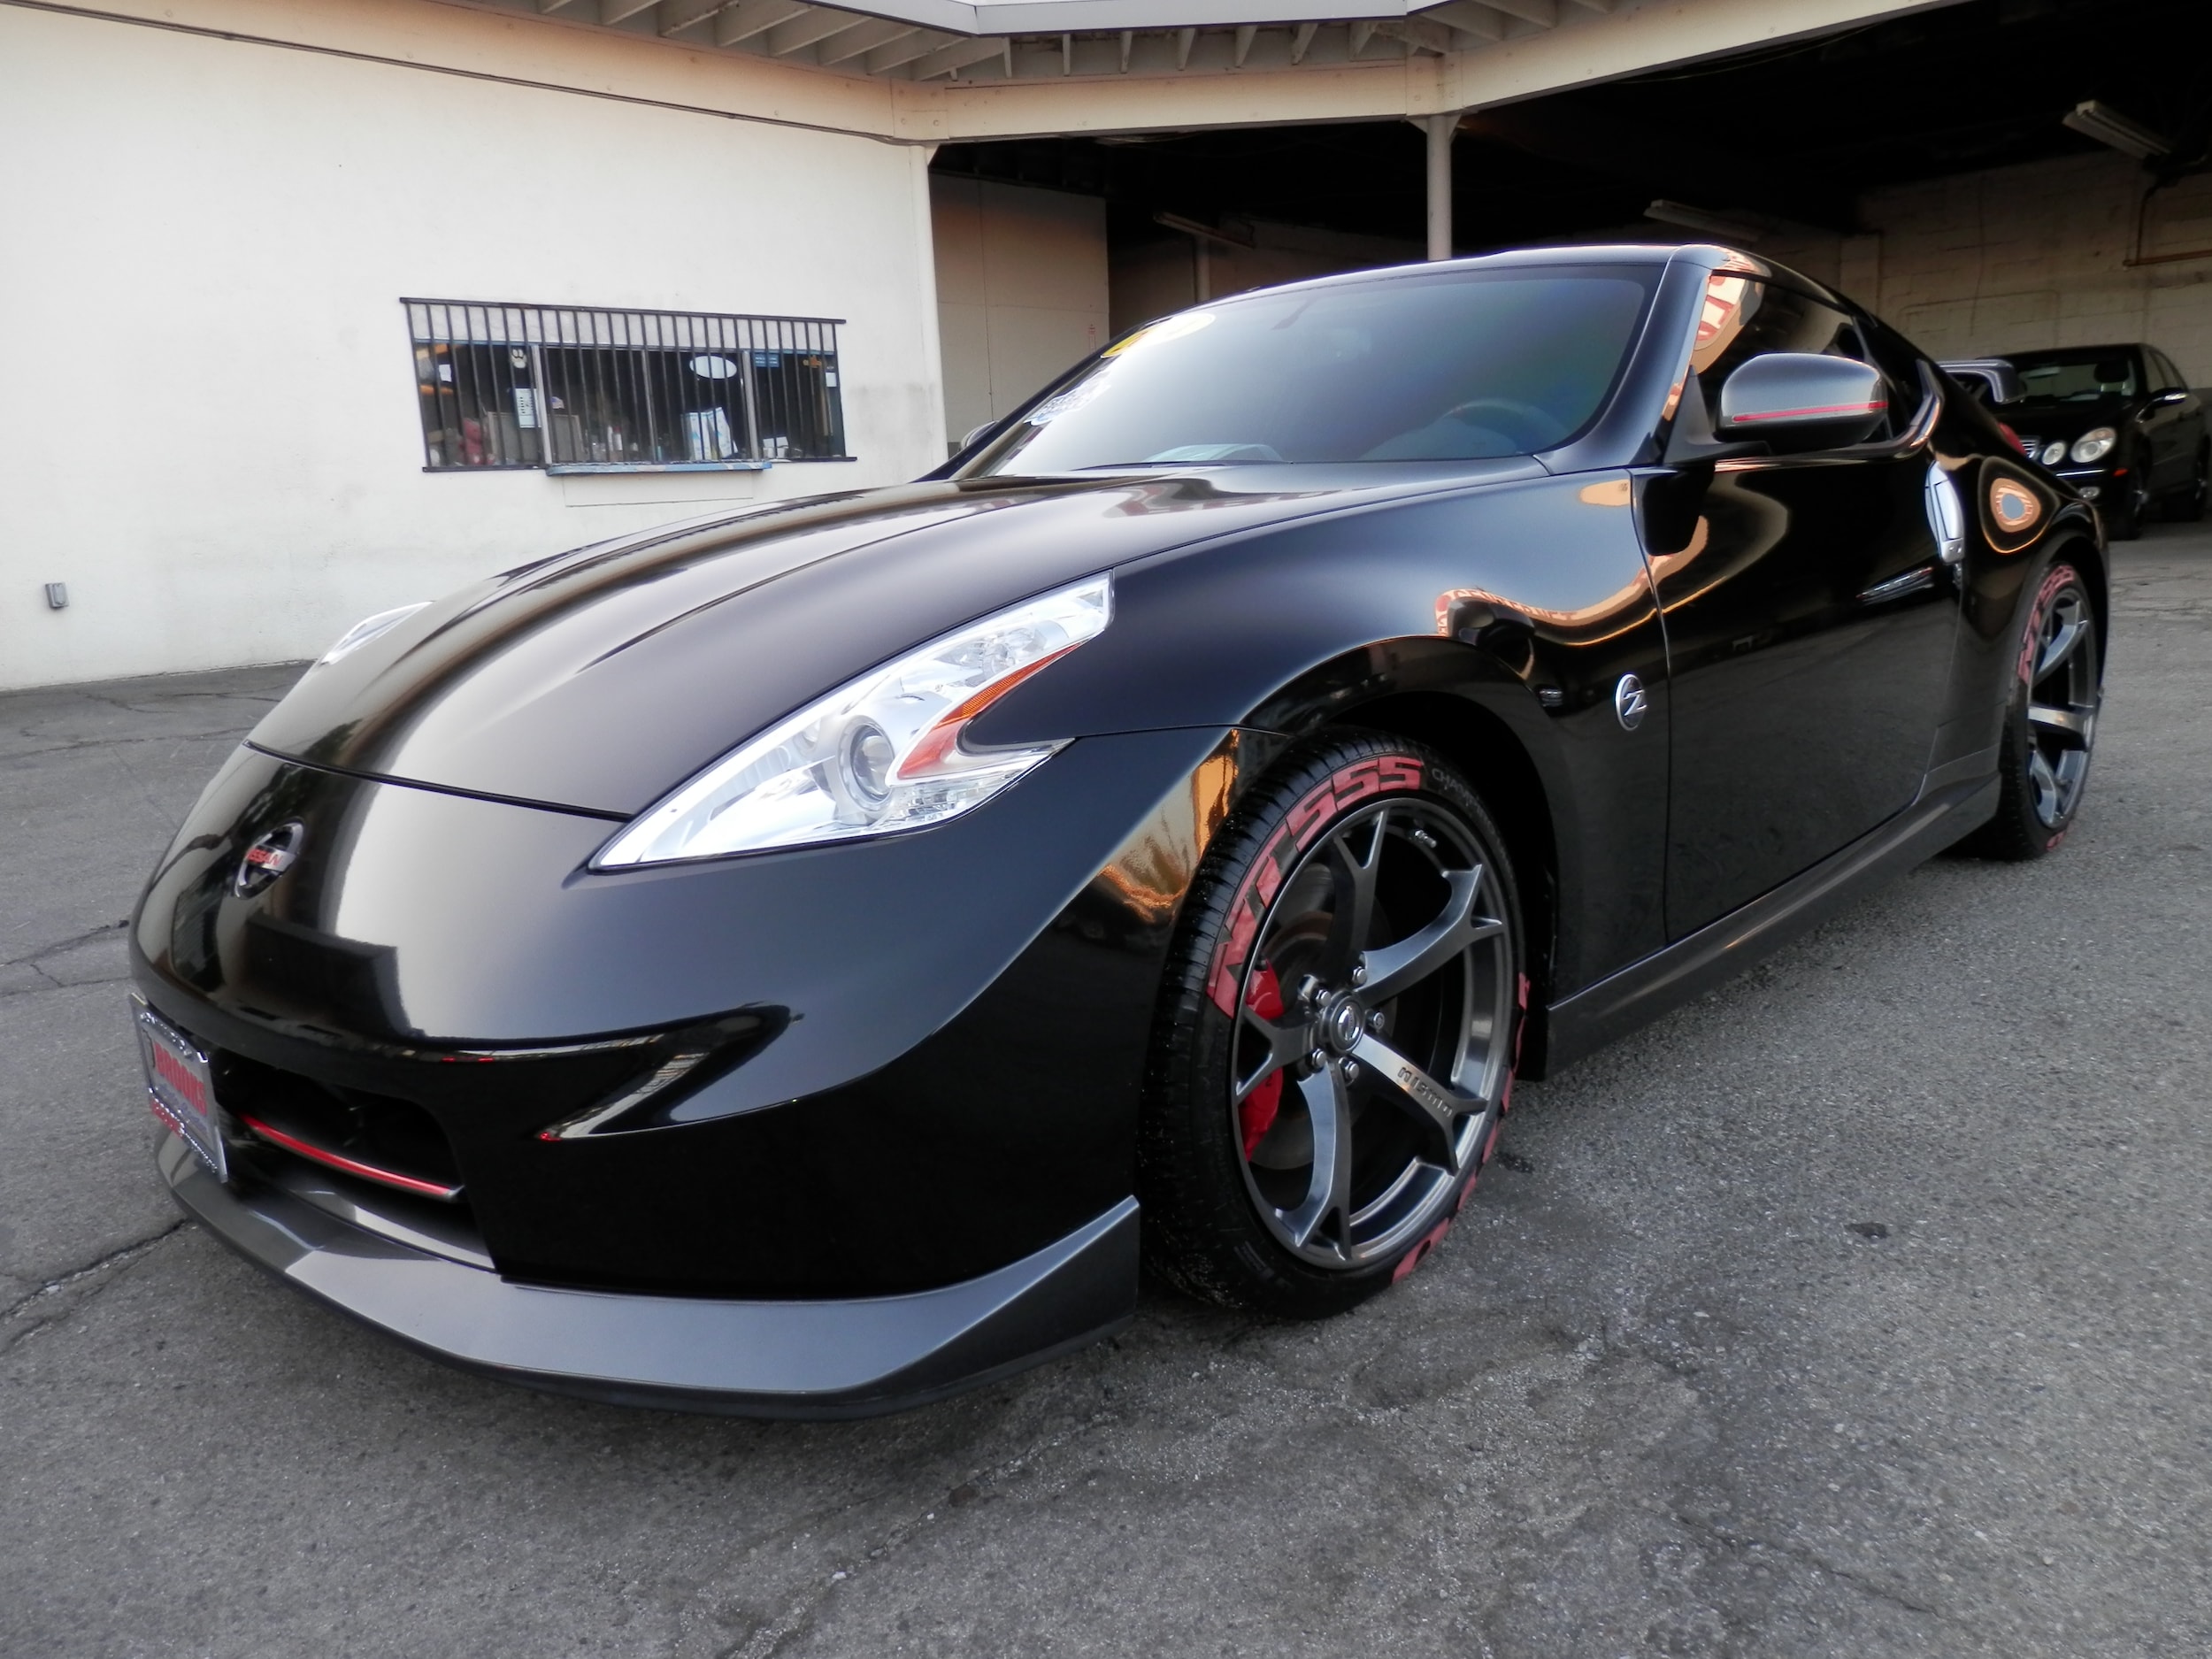 Used 2014 Nissan 370Z For Sale at Brooks Auto Center | VIN 